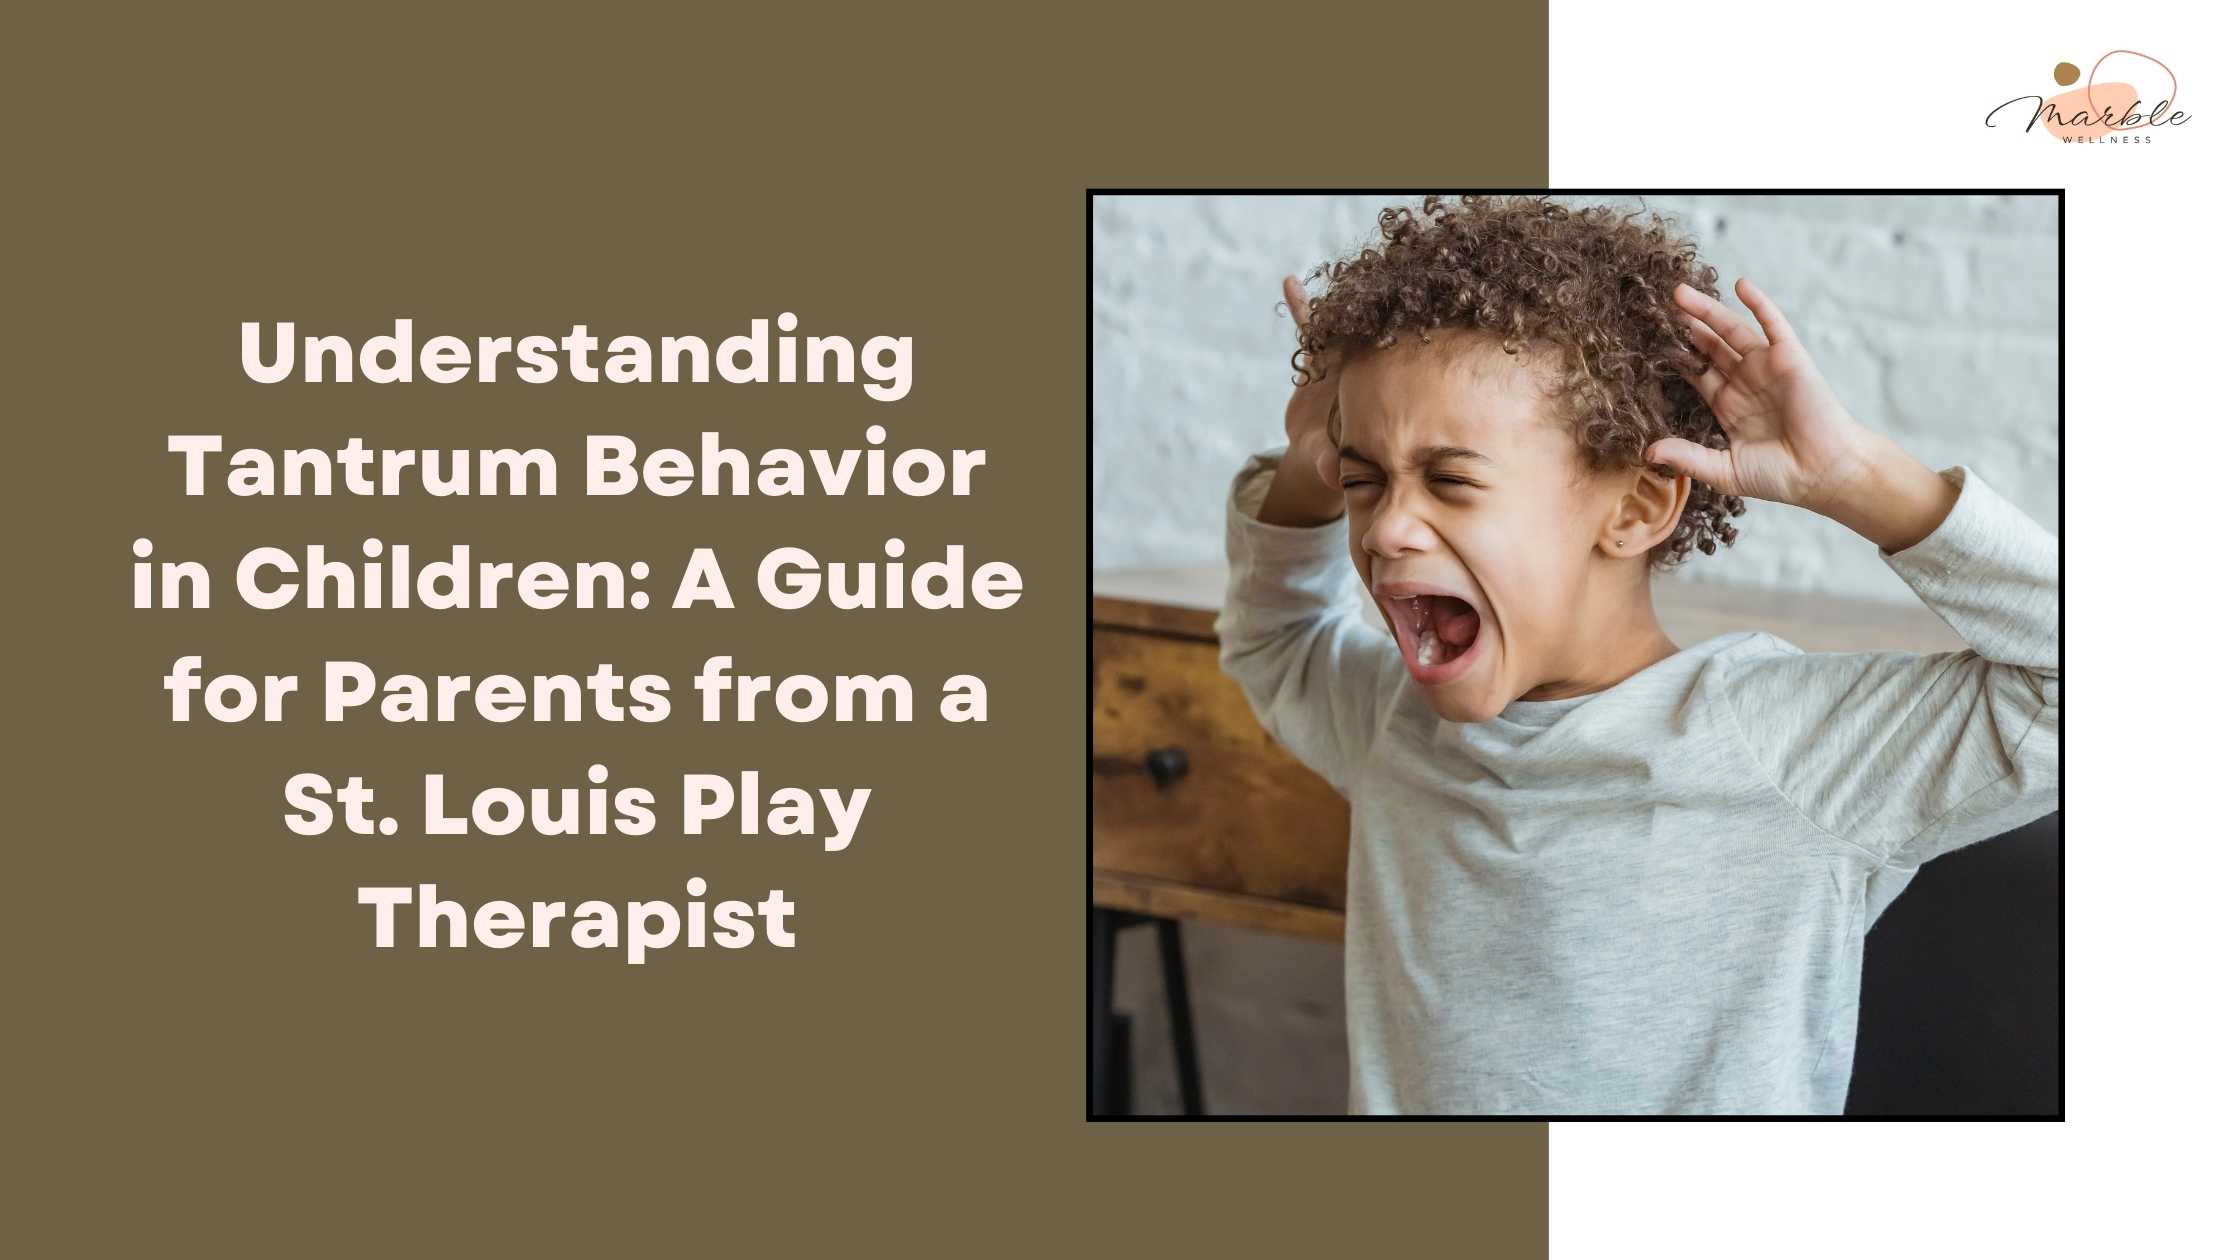 Child having a tantrum. This represents how understanding tantrum behavior in children is crucial for parents to know how they can better support their kids.